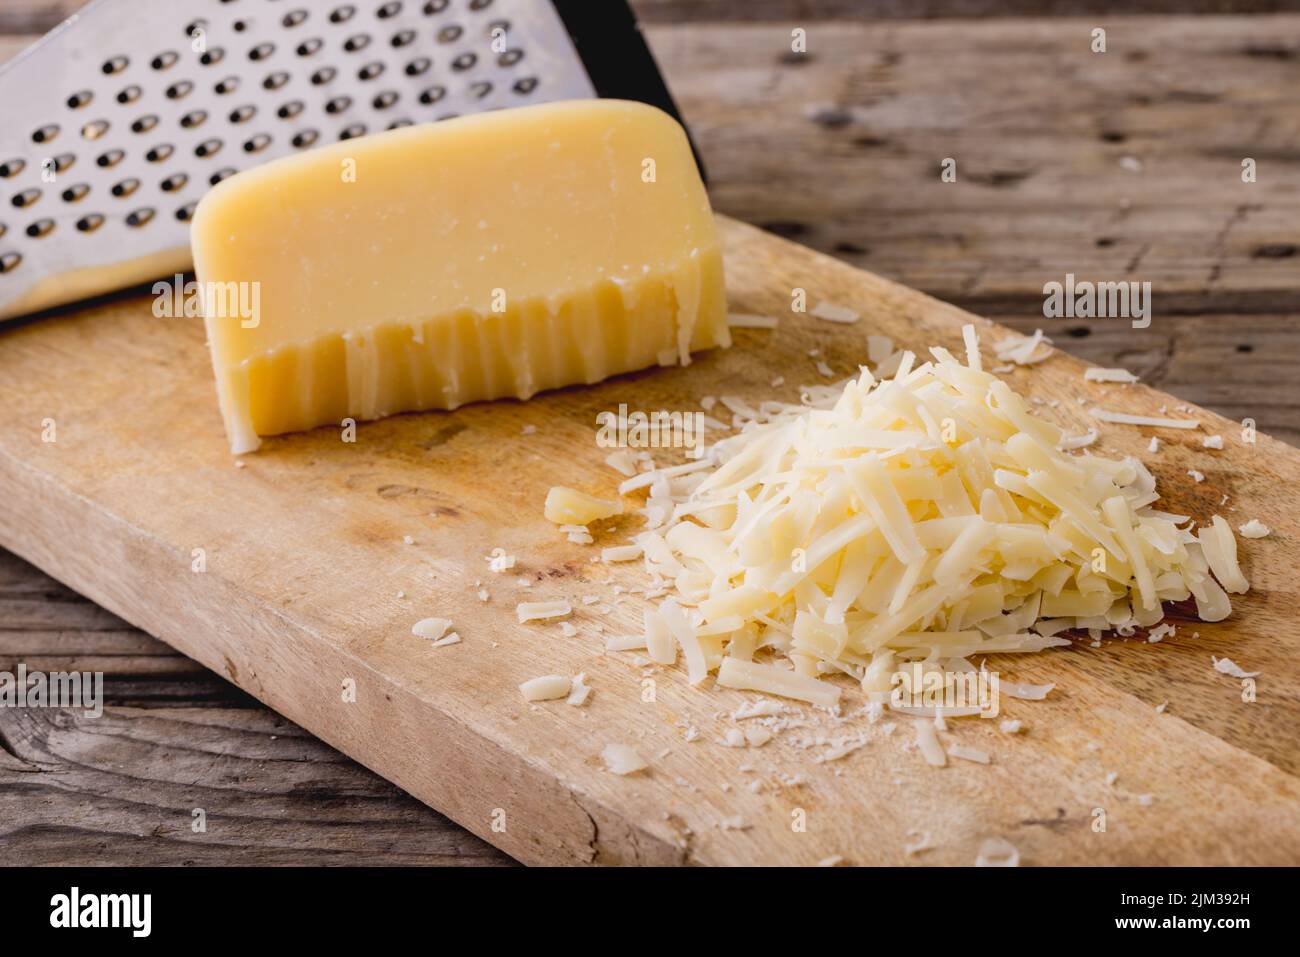 Close-up of grated cheese with grater on wooden board, copy space Stock Photo